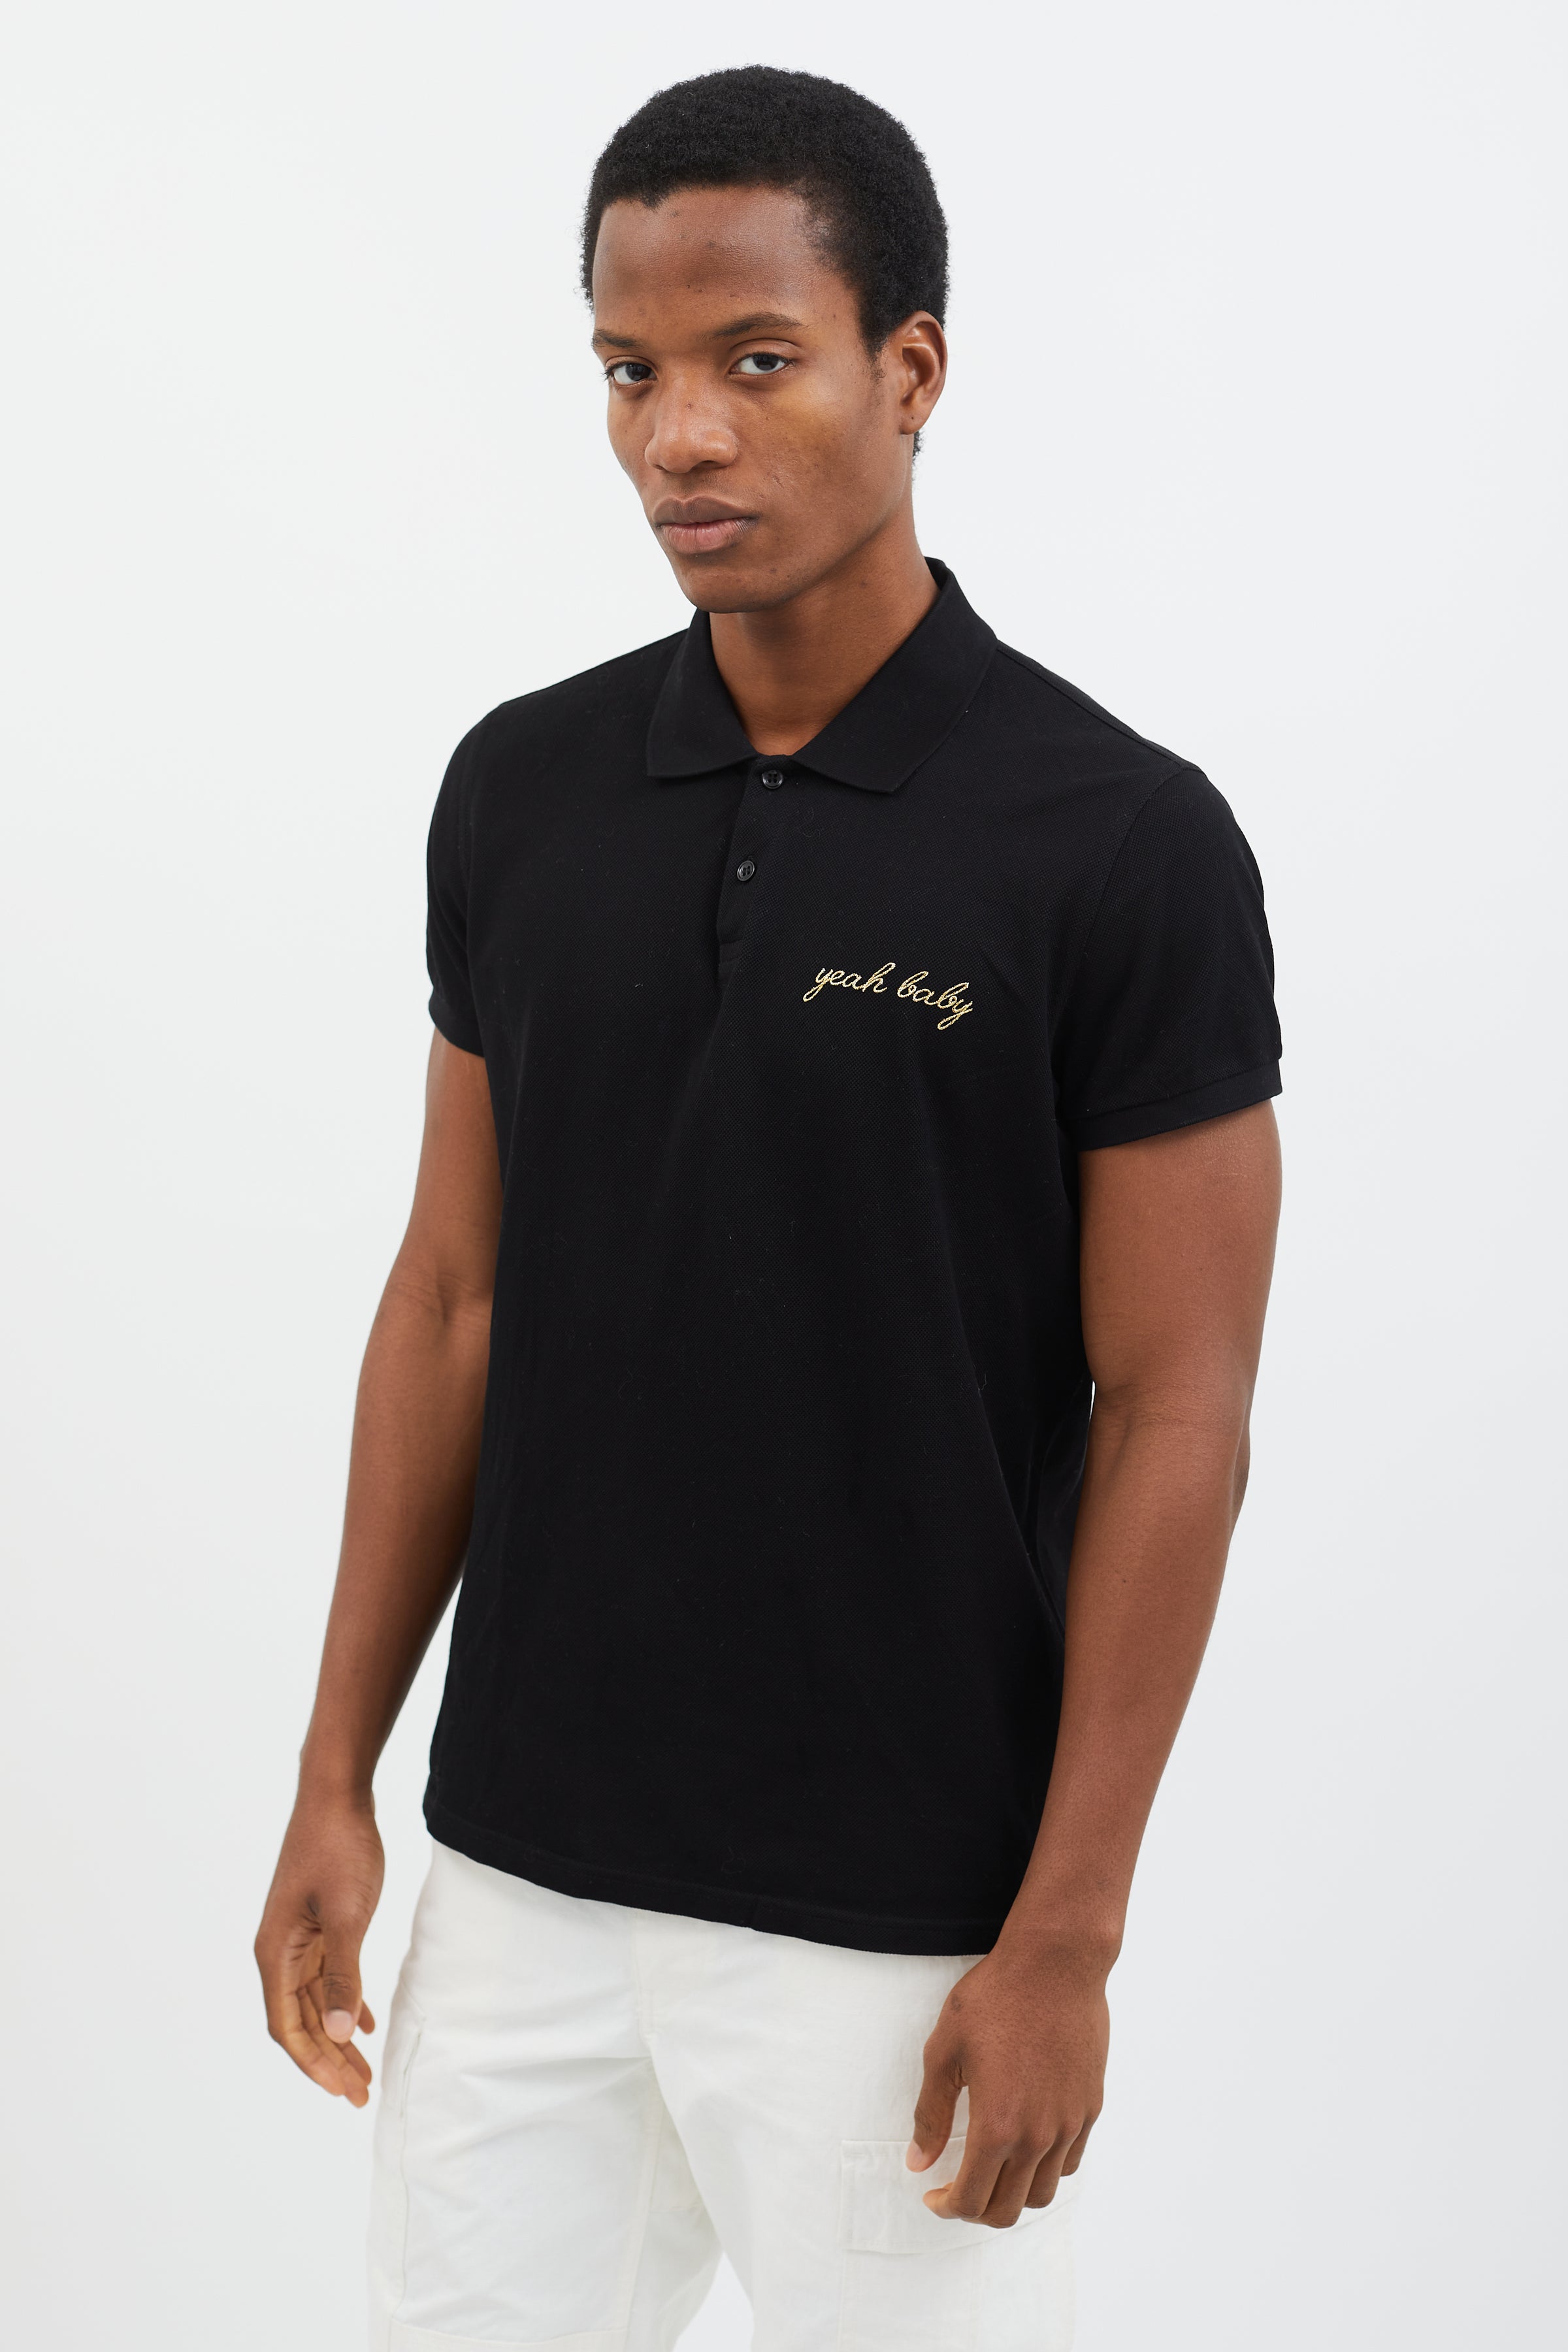 Saint // 2015 Gold-Tone Embroidery Polo Shirt – VSP Consignment